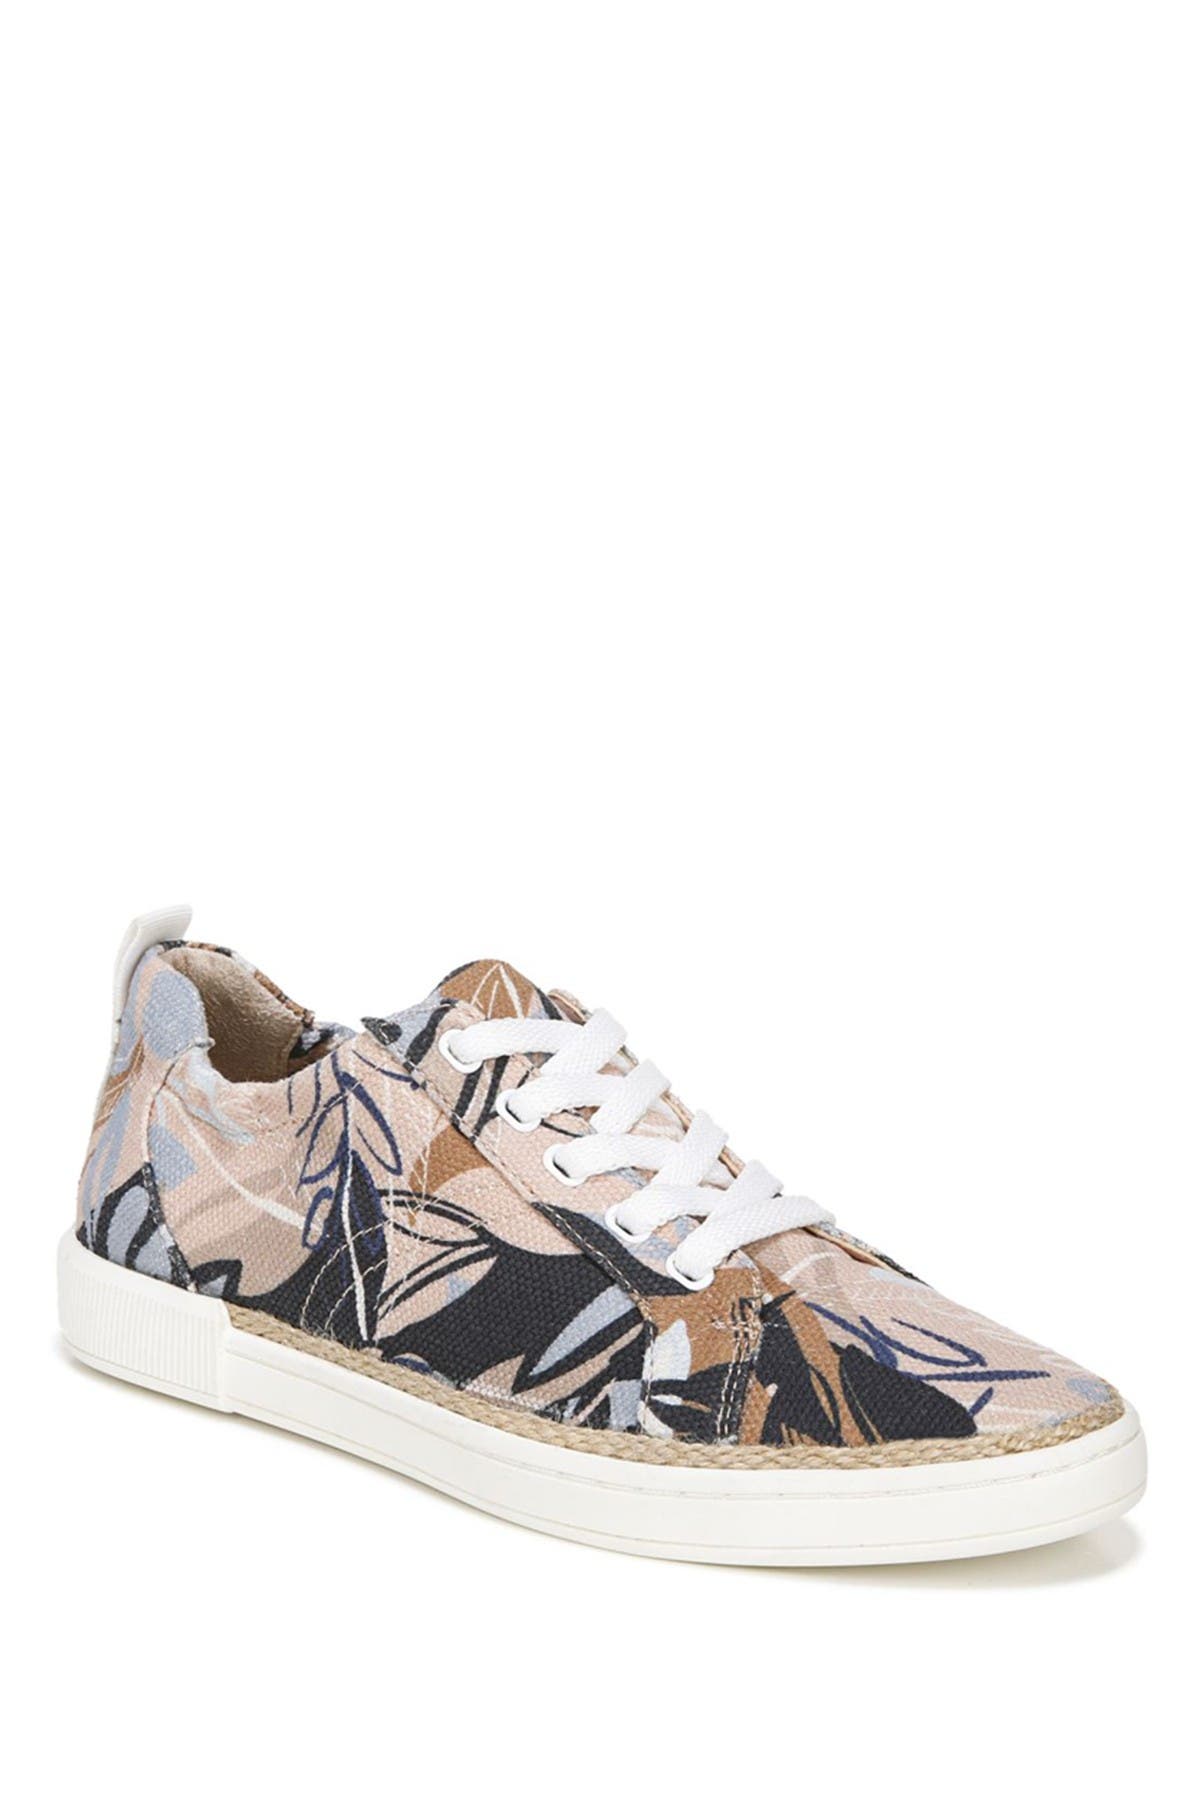 naturalizer sneakers wide